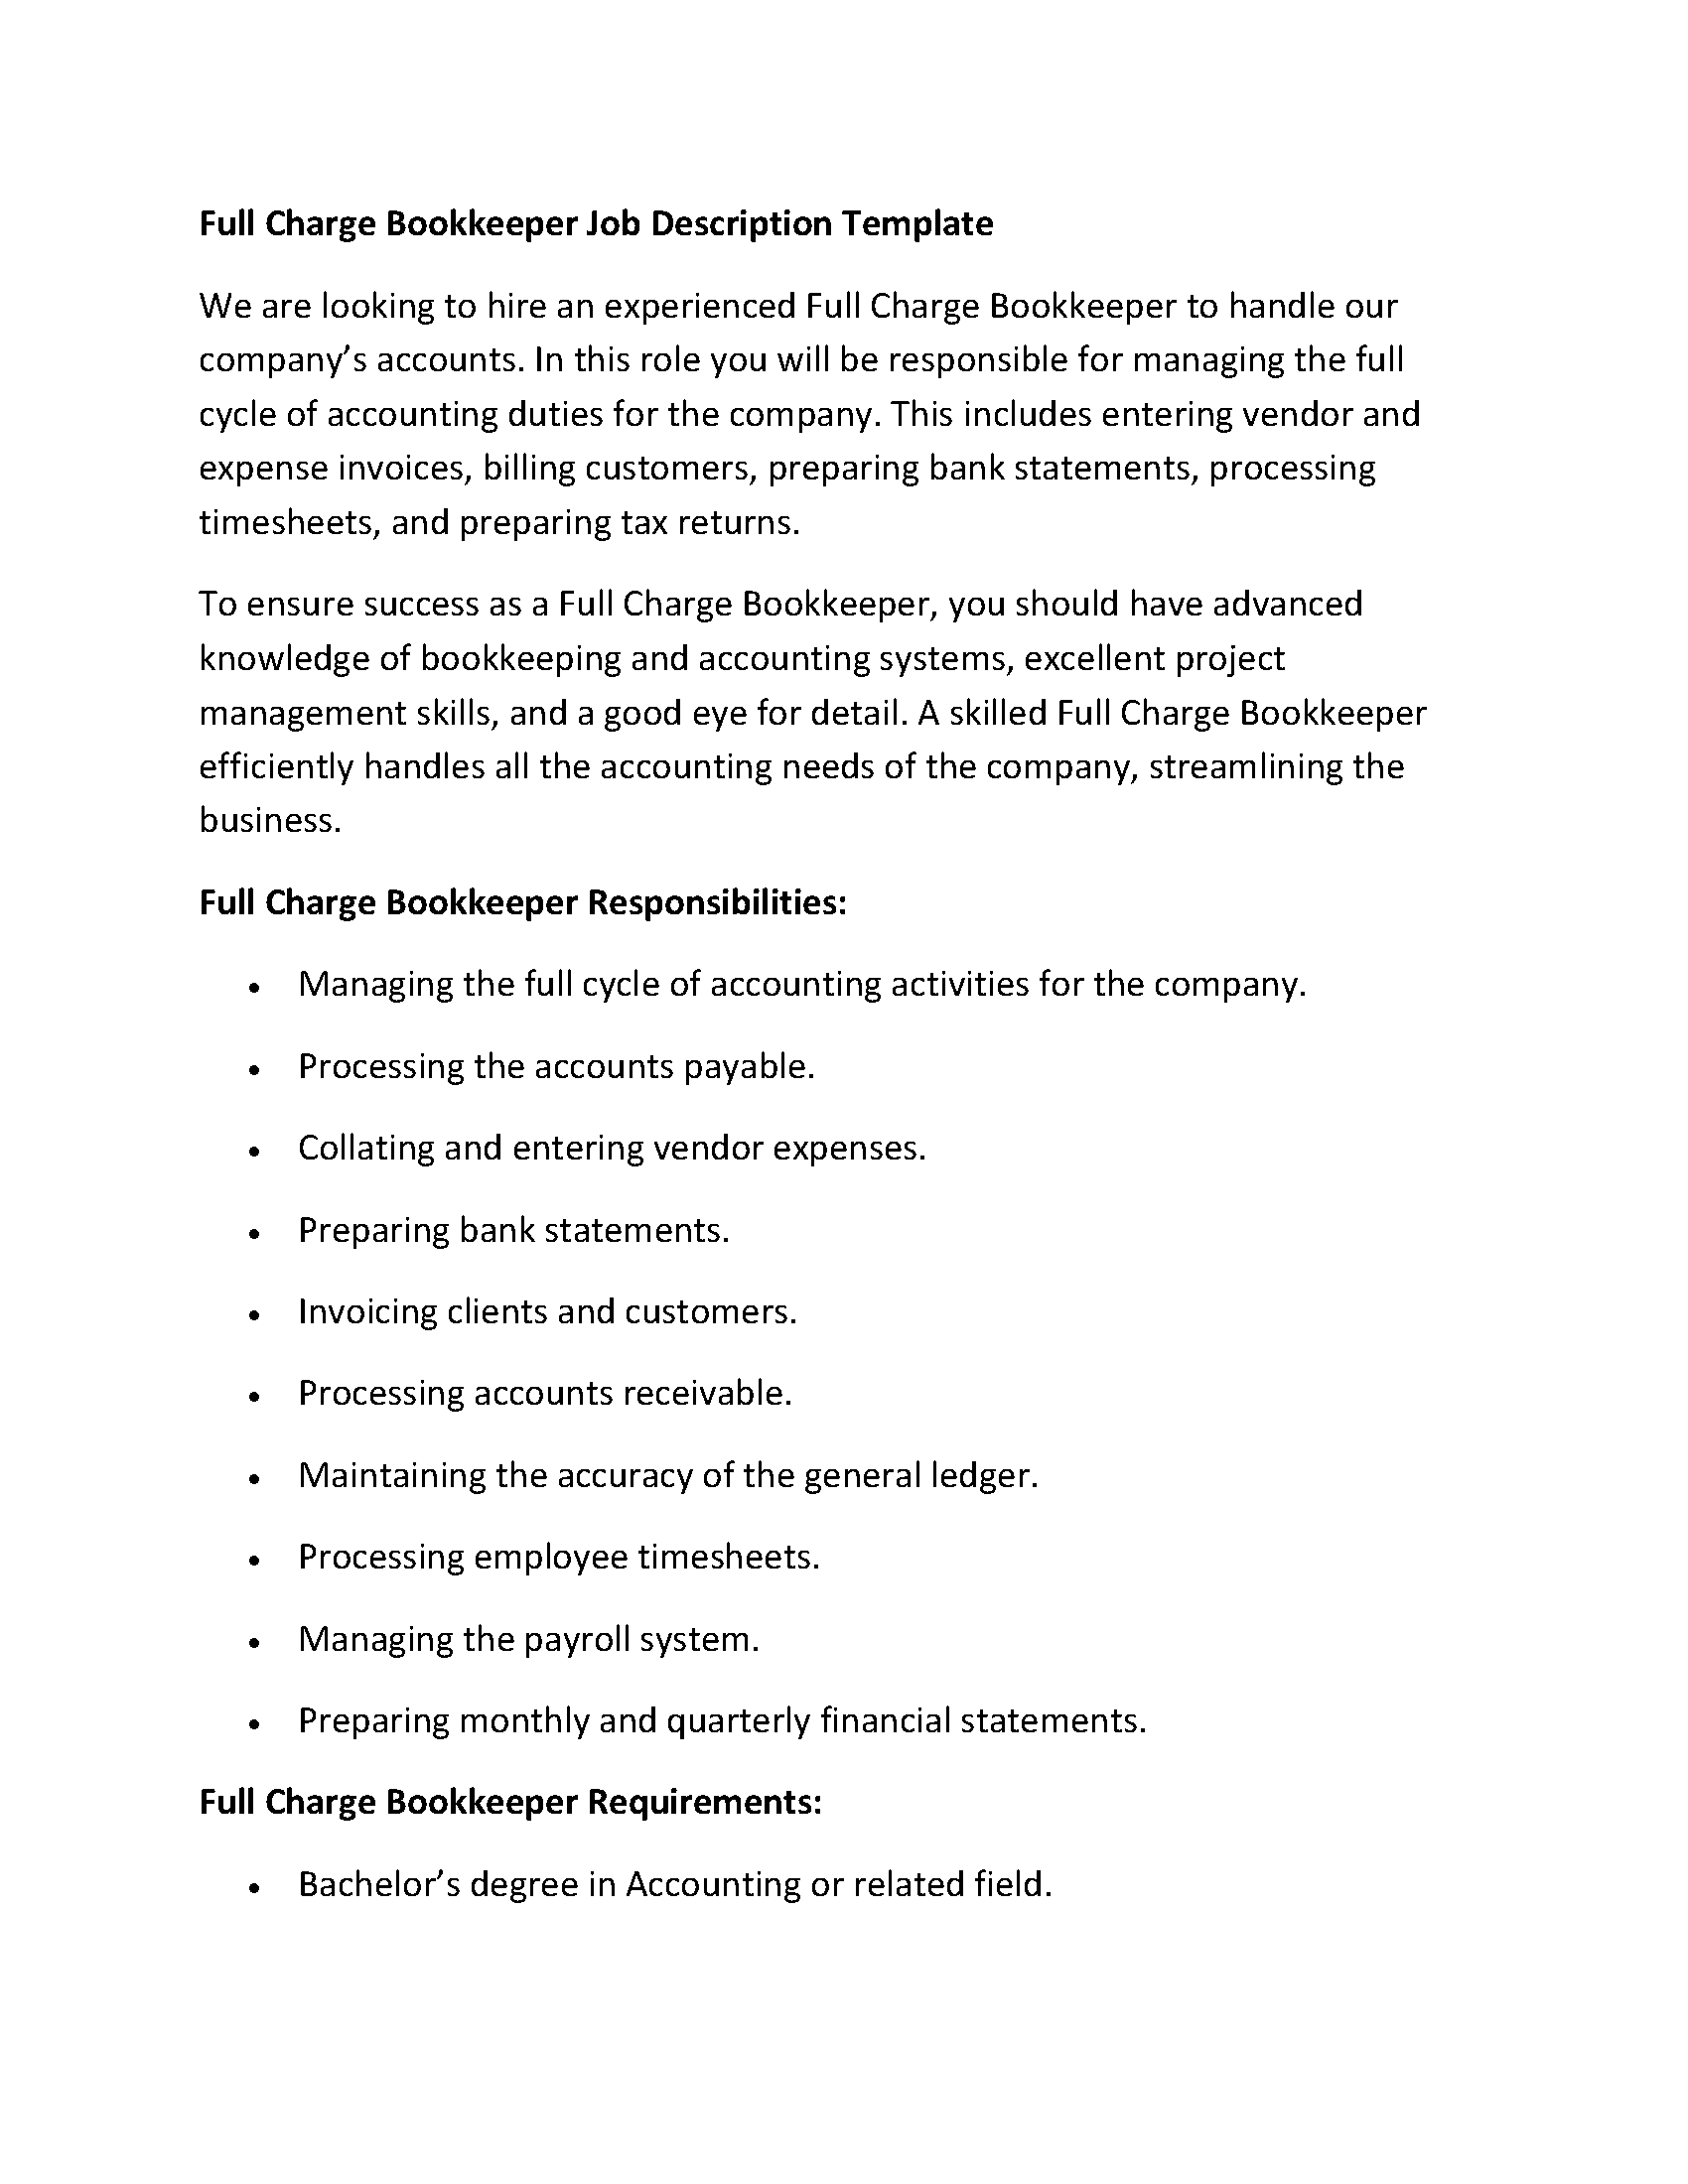 Full Charge Bookkeeper Job Description Template